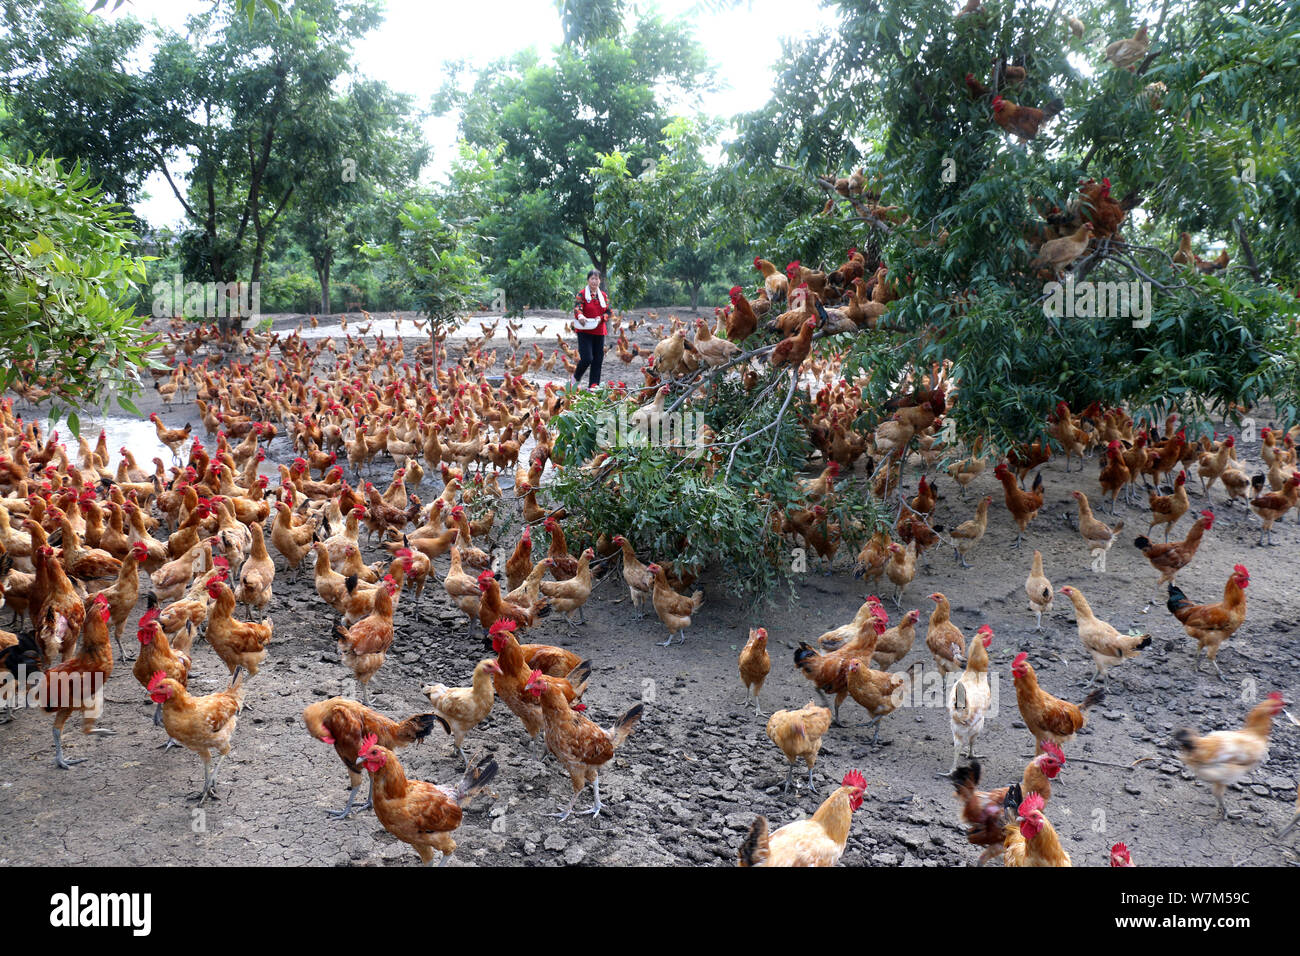 Hundreds of farmed chickens, nicknamed 'airplanes' for their uncommonly strong ability to fly, are seen under and on trees in a village in Guanyun cou Stock Photo